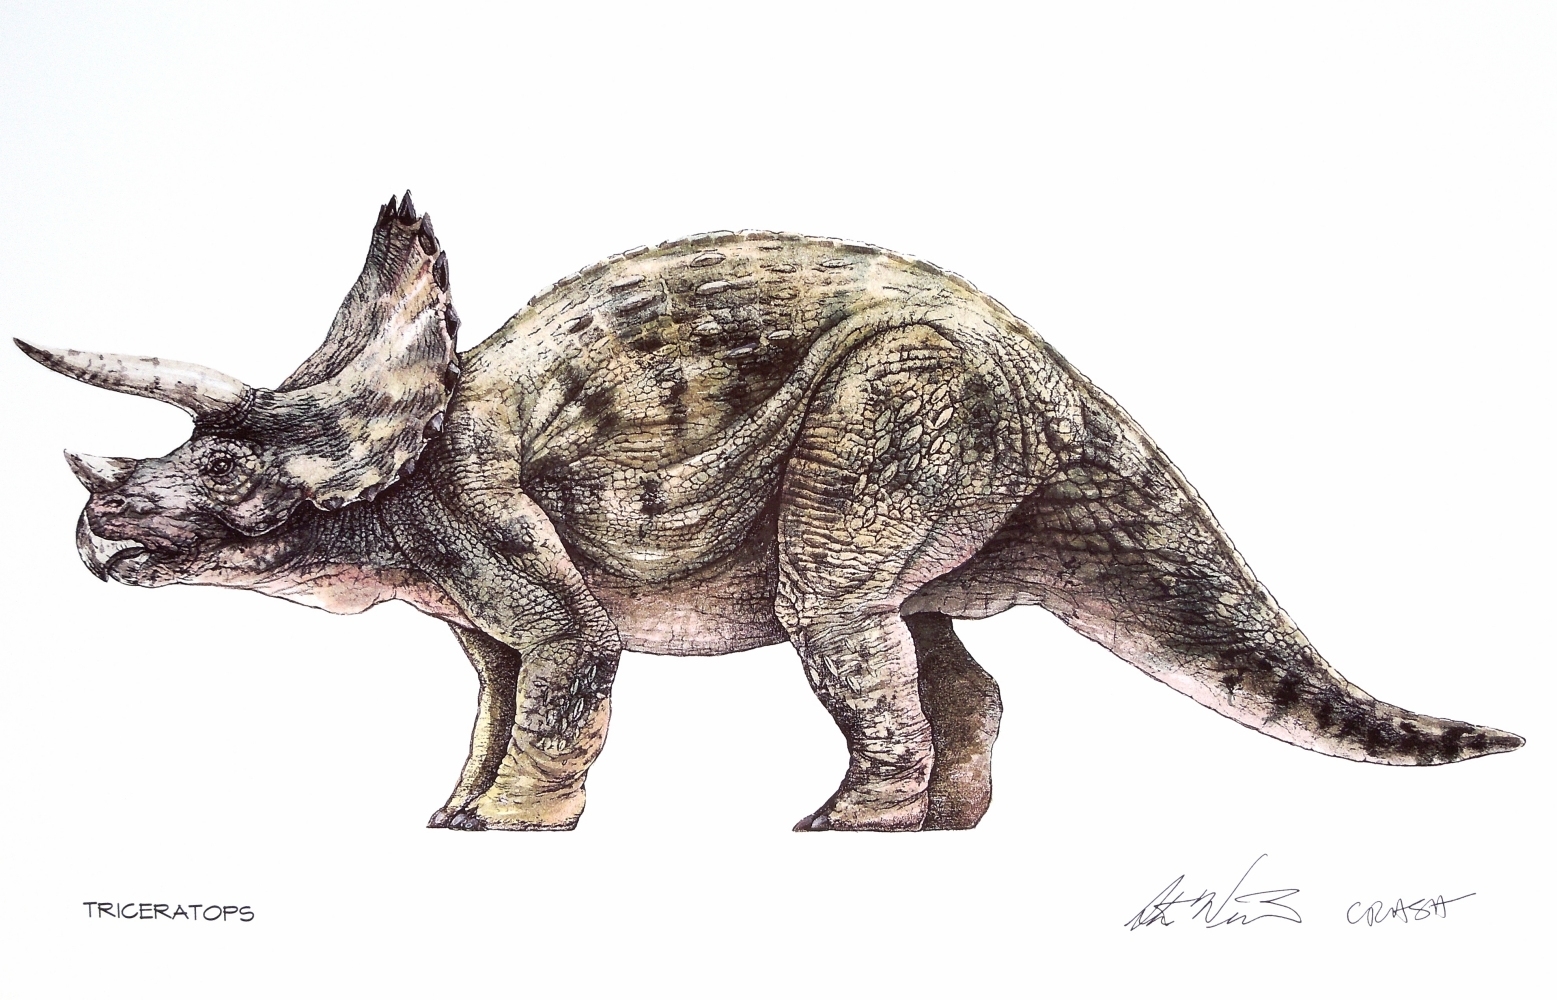 Image Triceratops Jp Concept Jurassic Park Wiki Fandom Powered By Wikia 